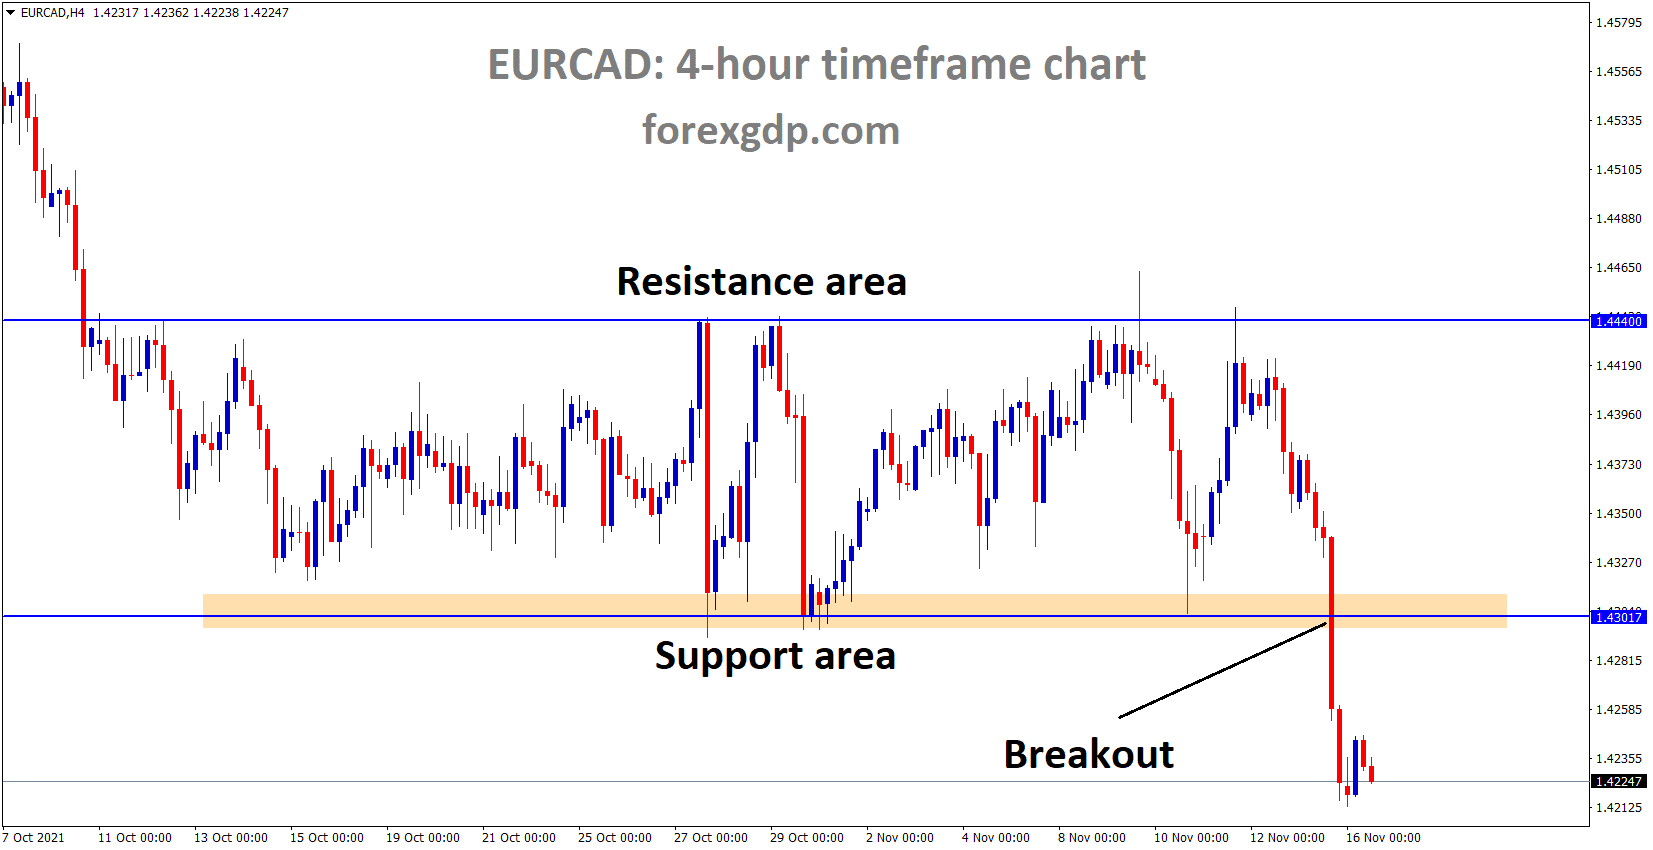 EURCAD has broken the Box pattern and major horizontal support area after a long time consolidation